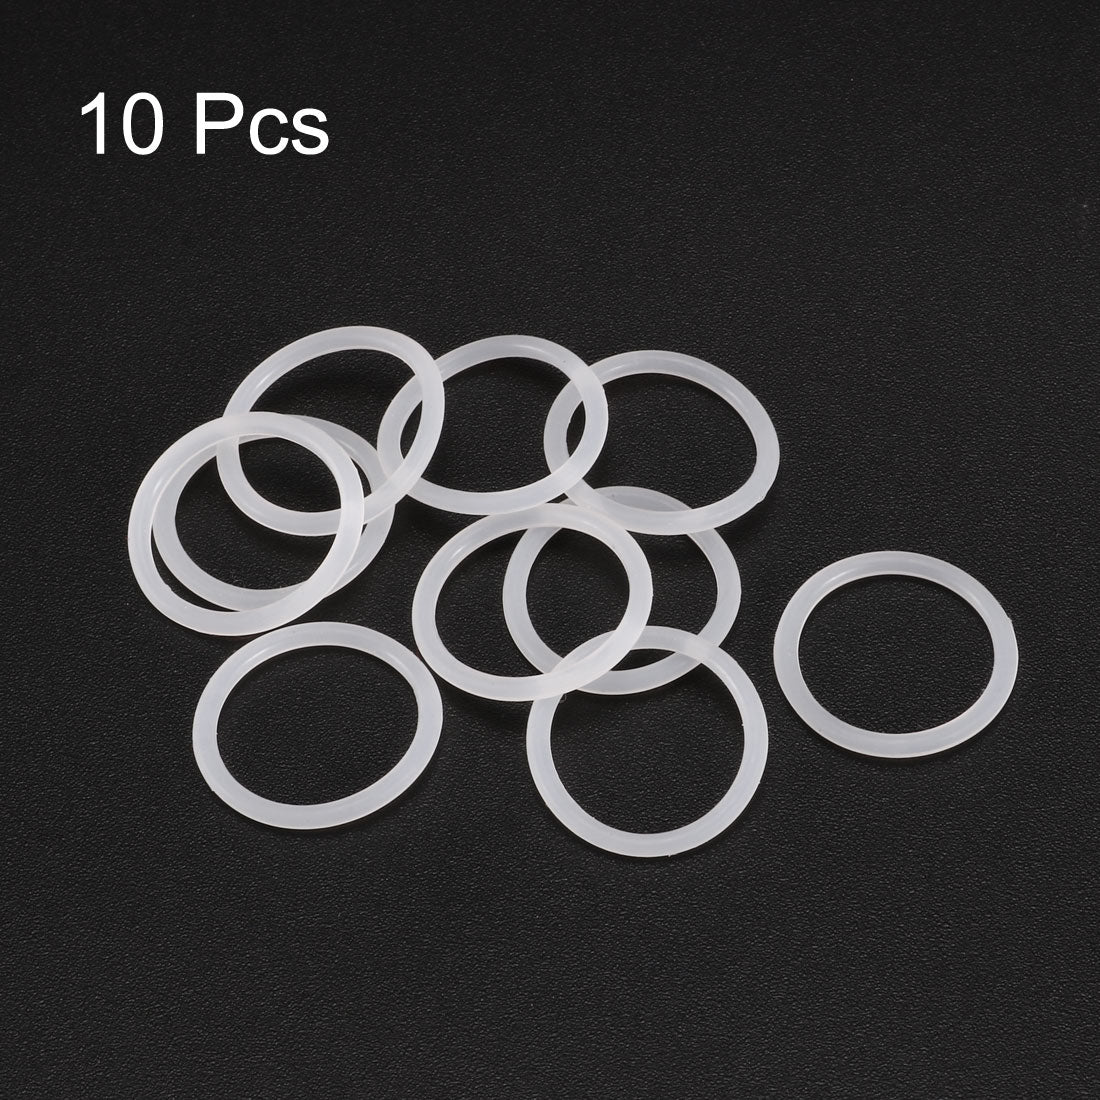 uxcell Uxcell Silicone O-Rings Seal Gasket for Pipe Repair